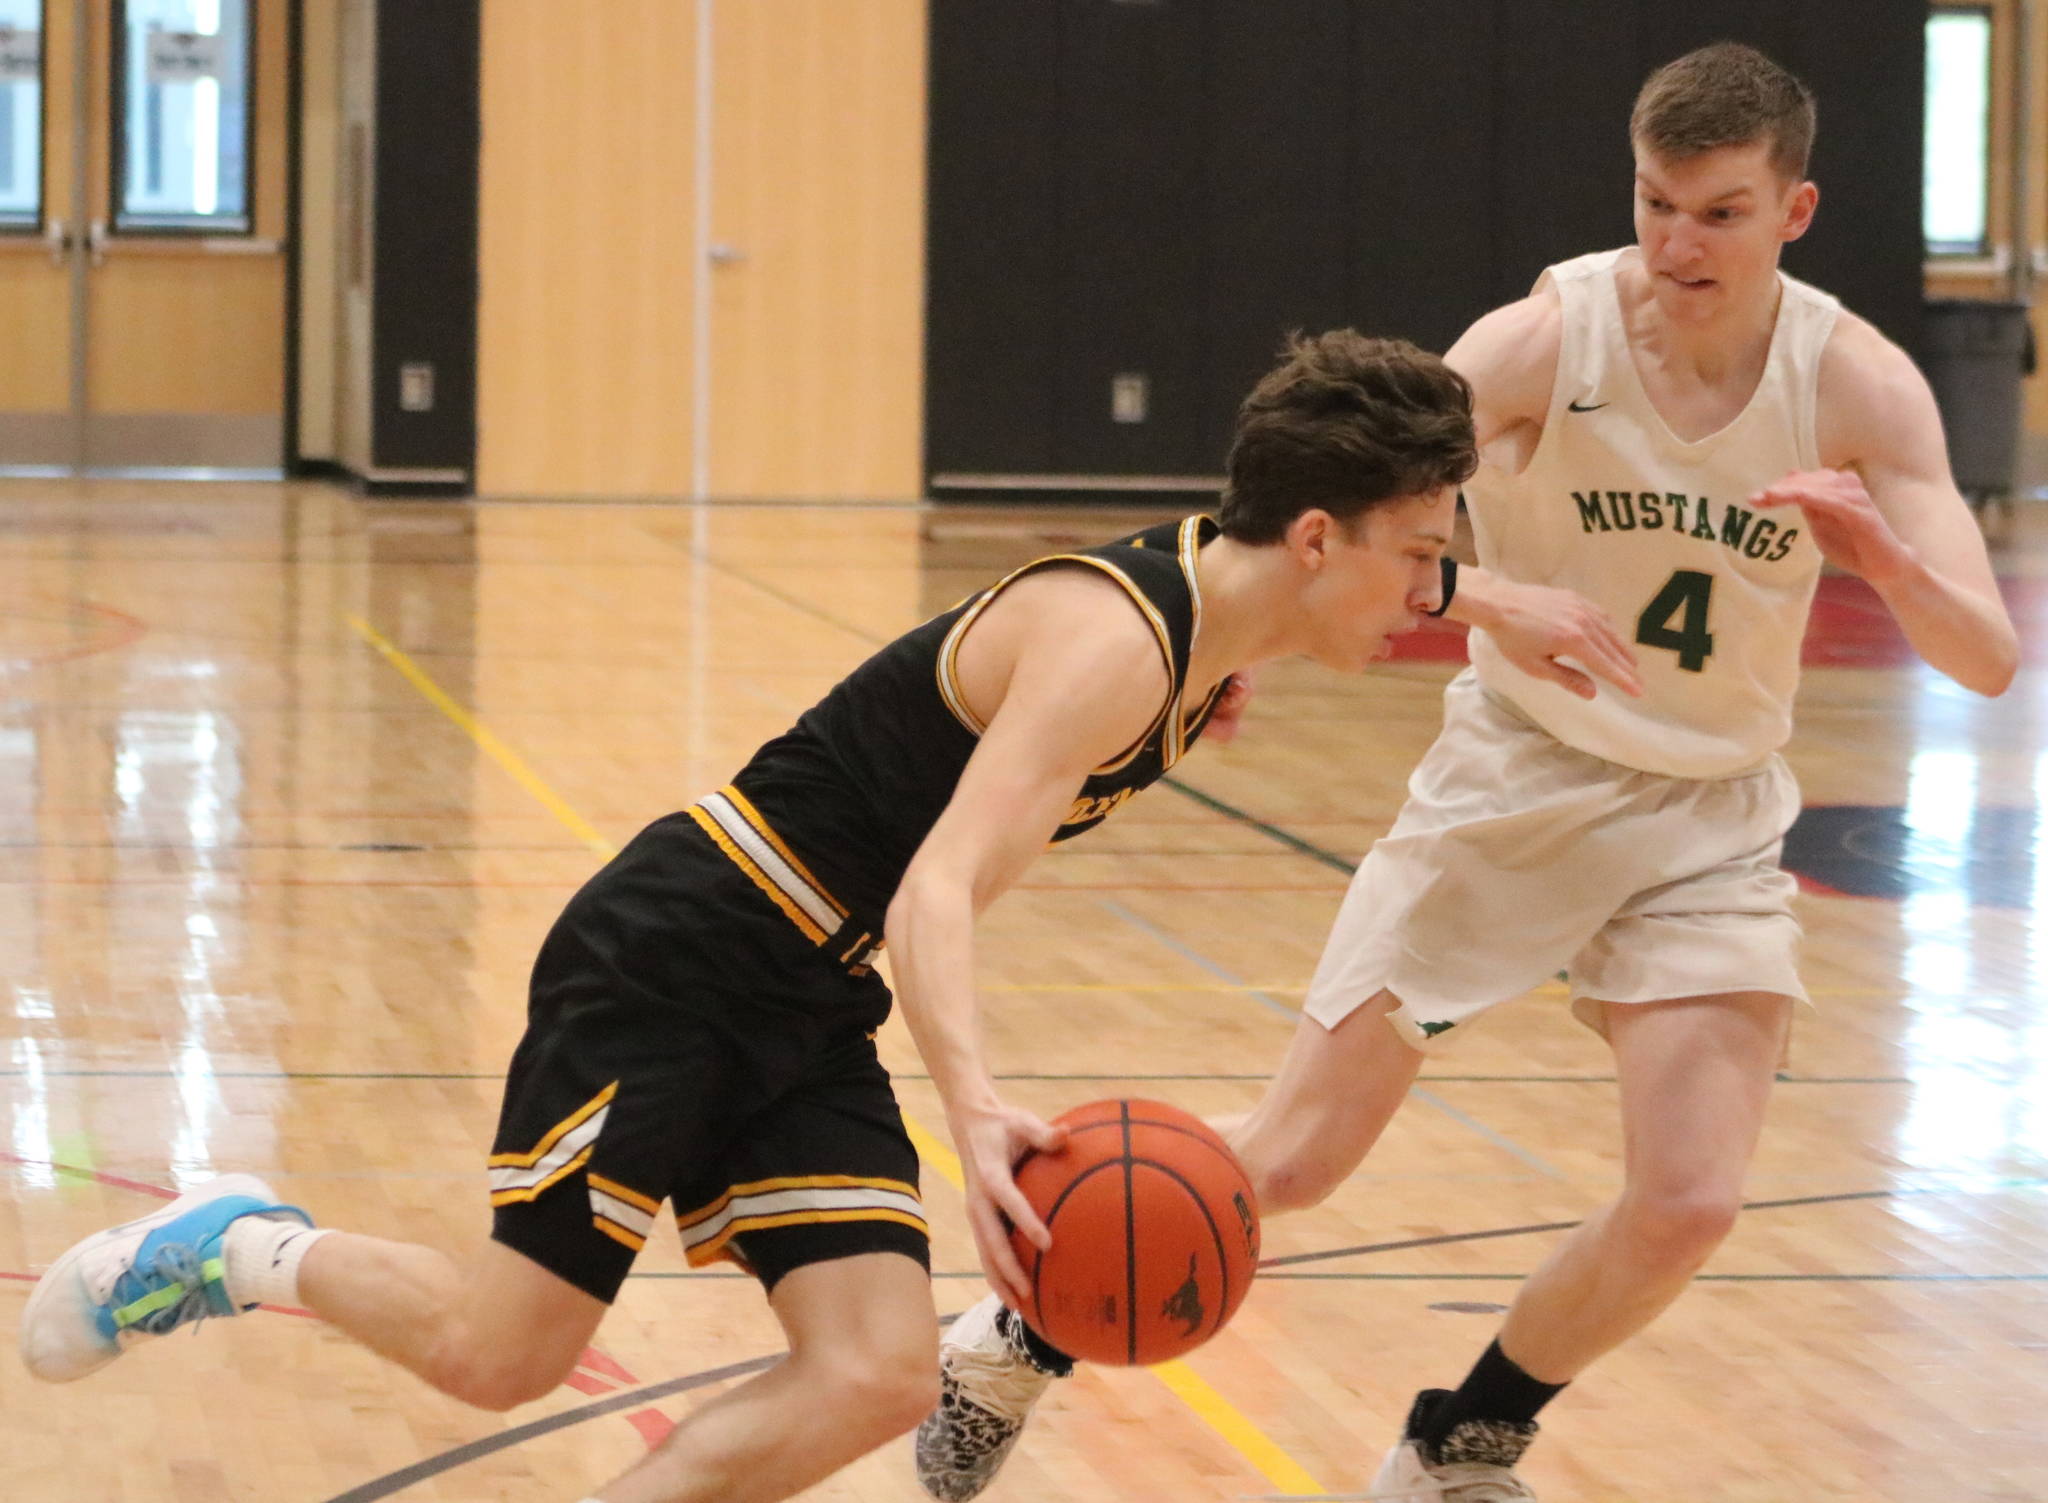 Inglemoor’s Zach Shimek scored 19 points to help lead the Vikings past Redmond in a 4A KingCo third-place game on Jan. 8. Benjamin Olson/staff photo